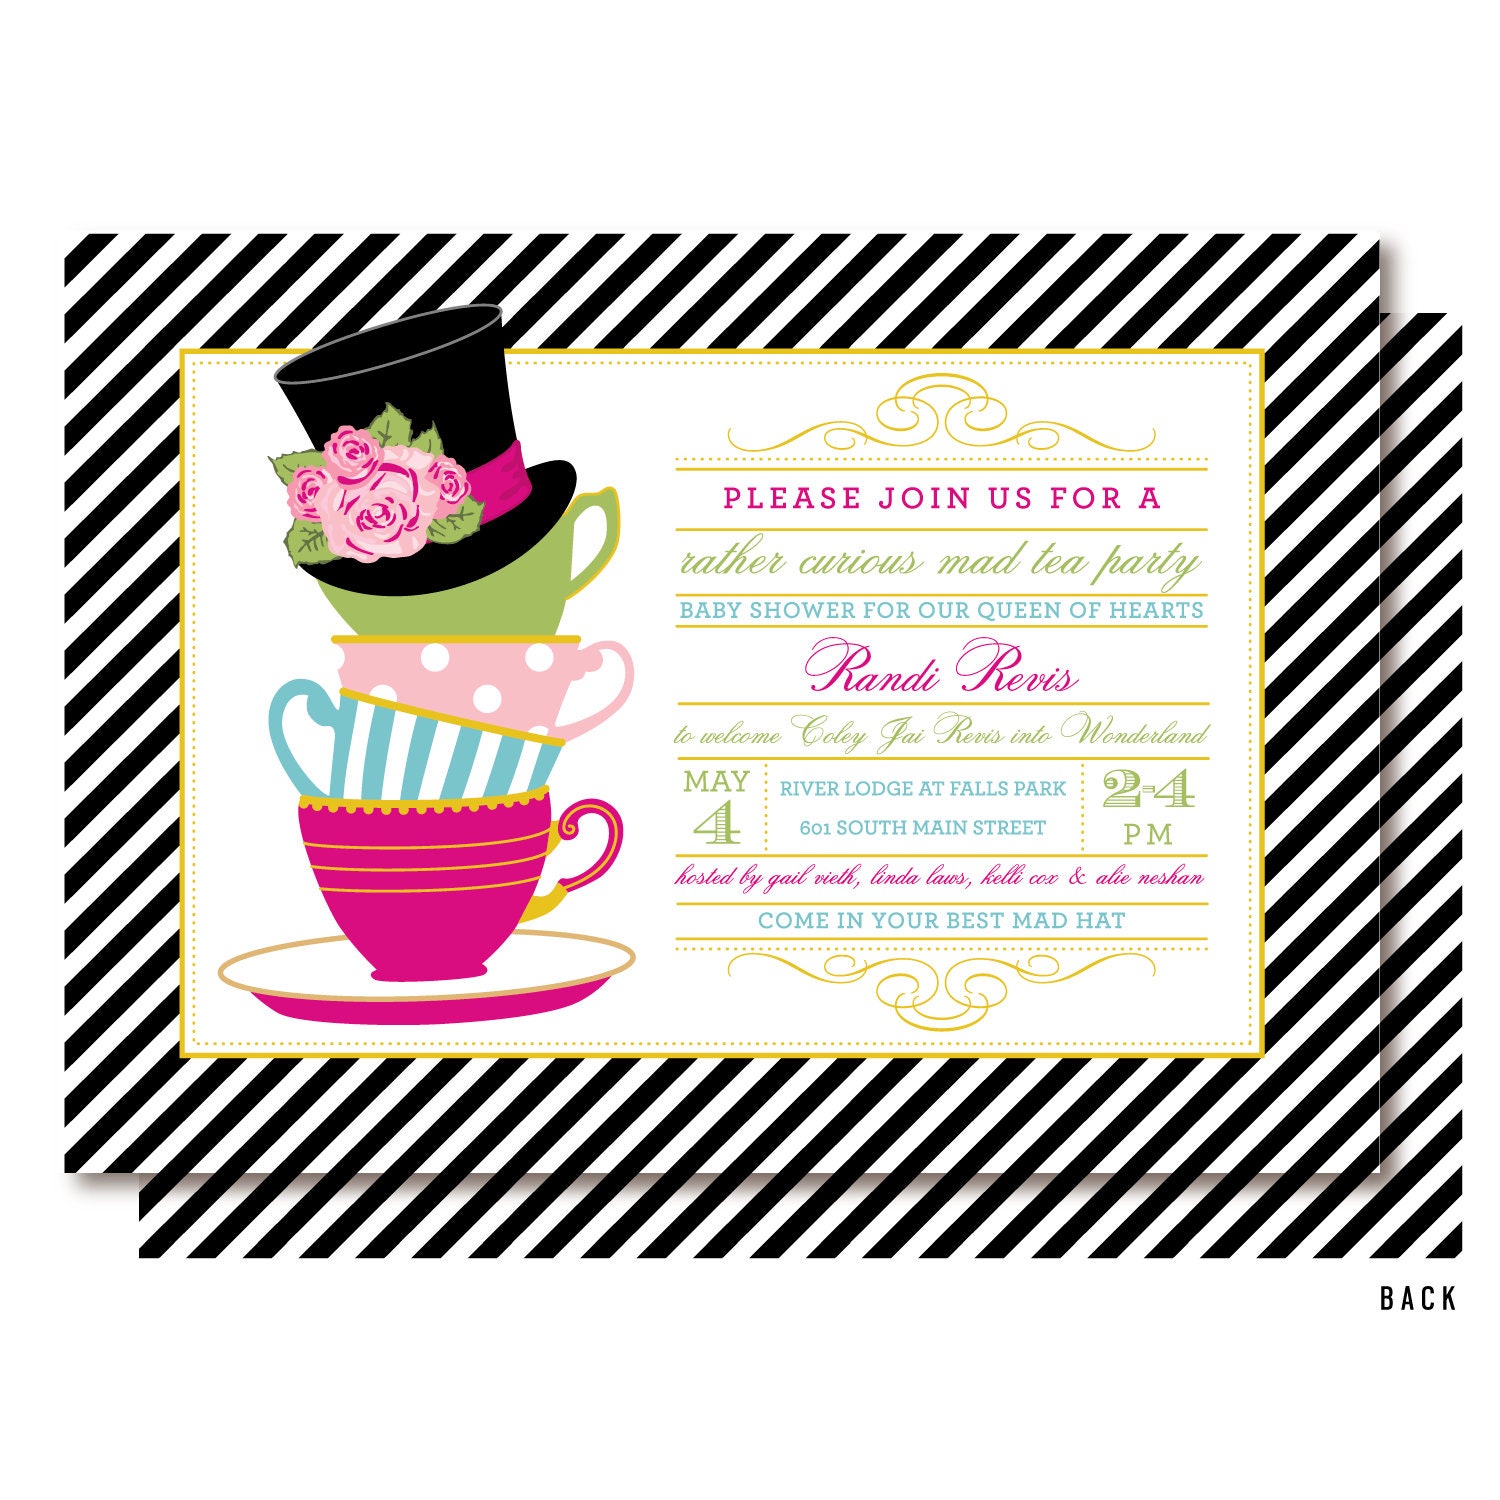 Alice in wonderland gatefold invitations Mad hatter tea party personalized  invites 5x7